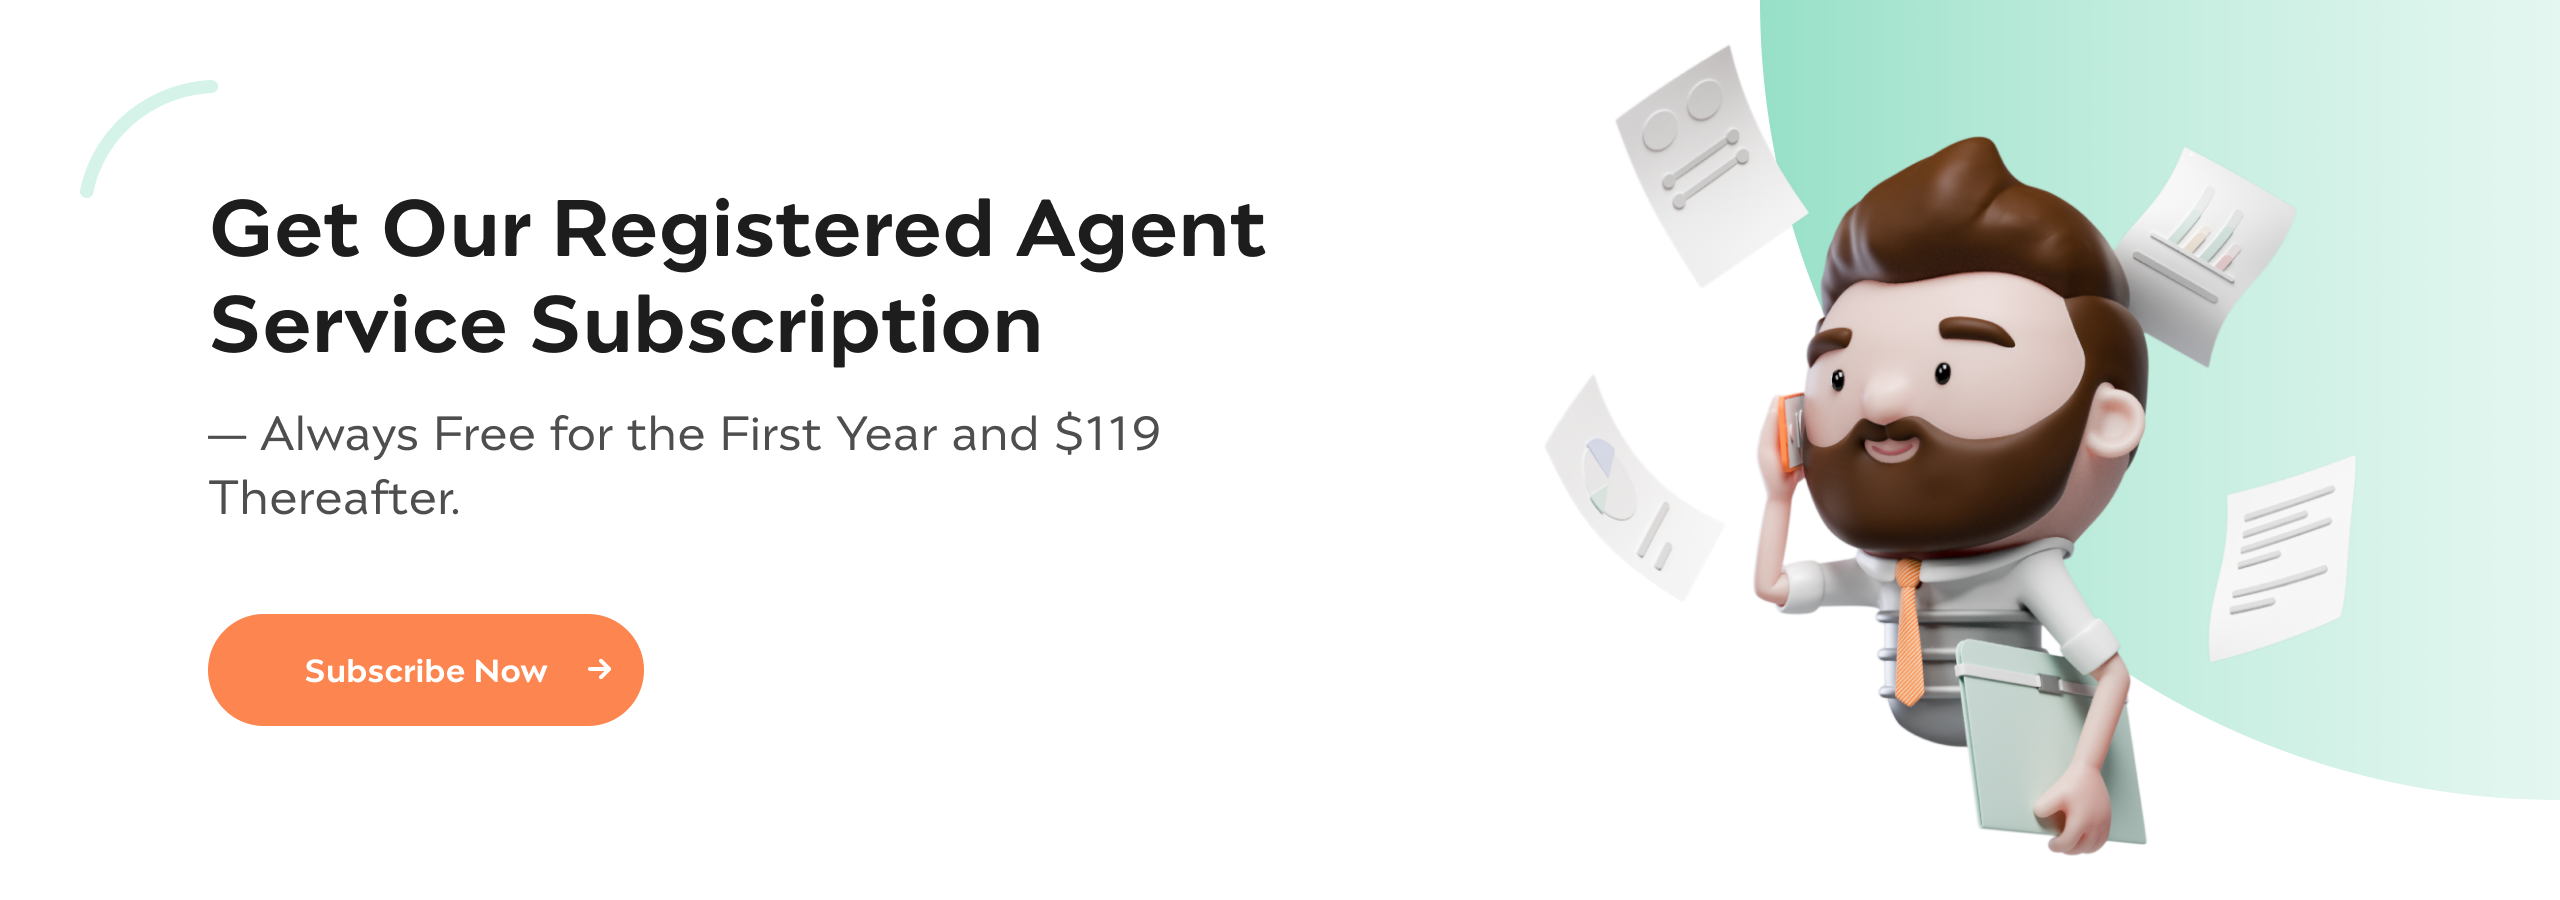 Get Our Registered Agent Service Subscription. Always Free for the First Year and $119 Thereafter.